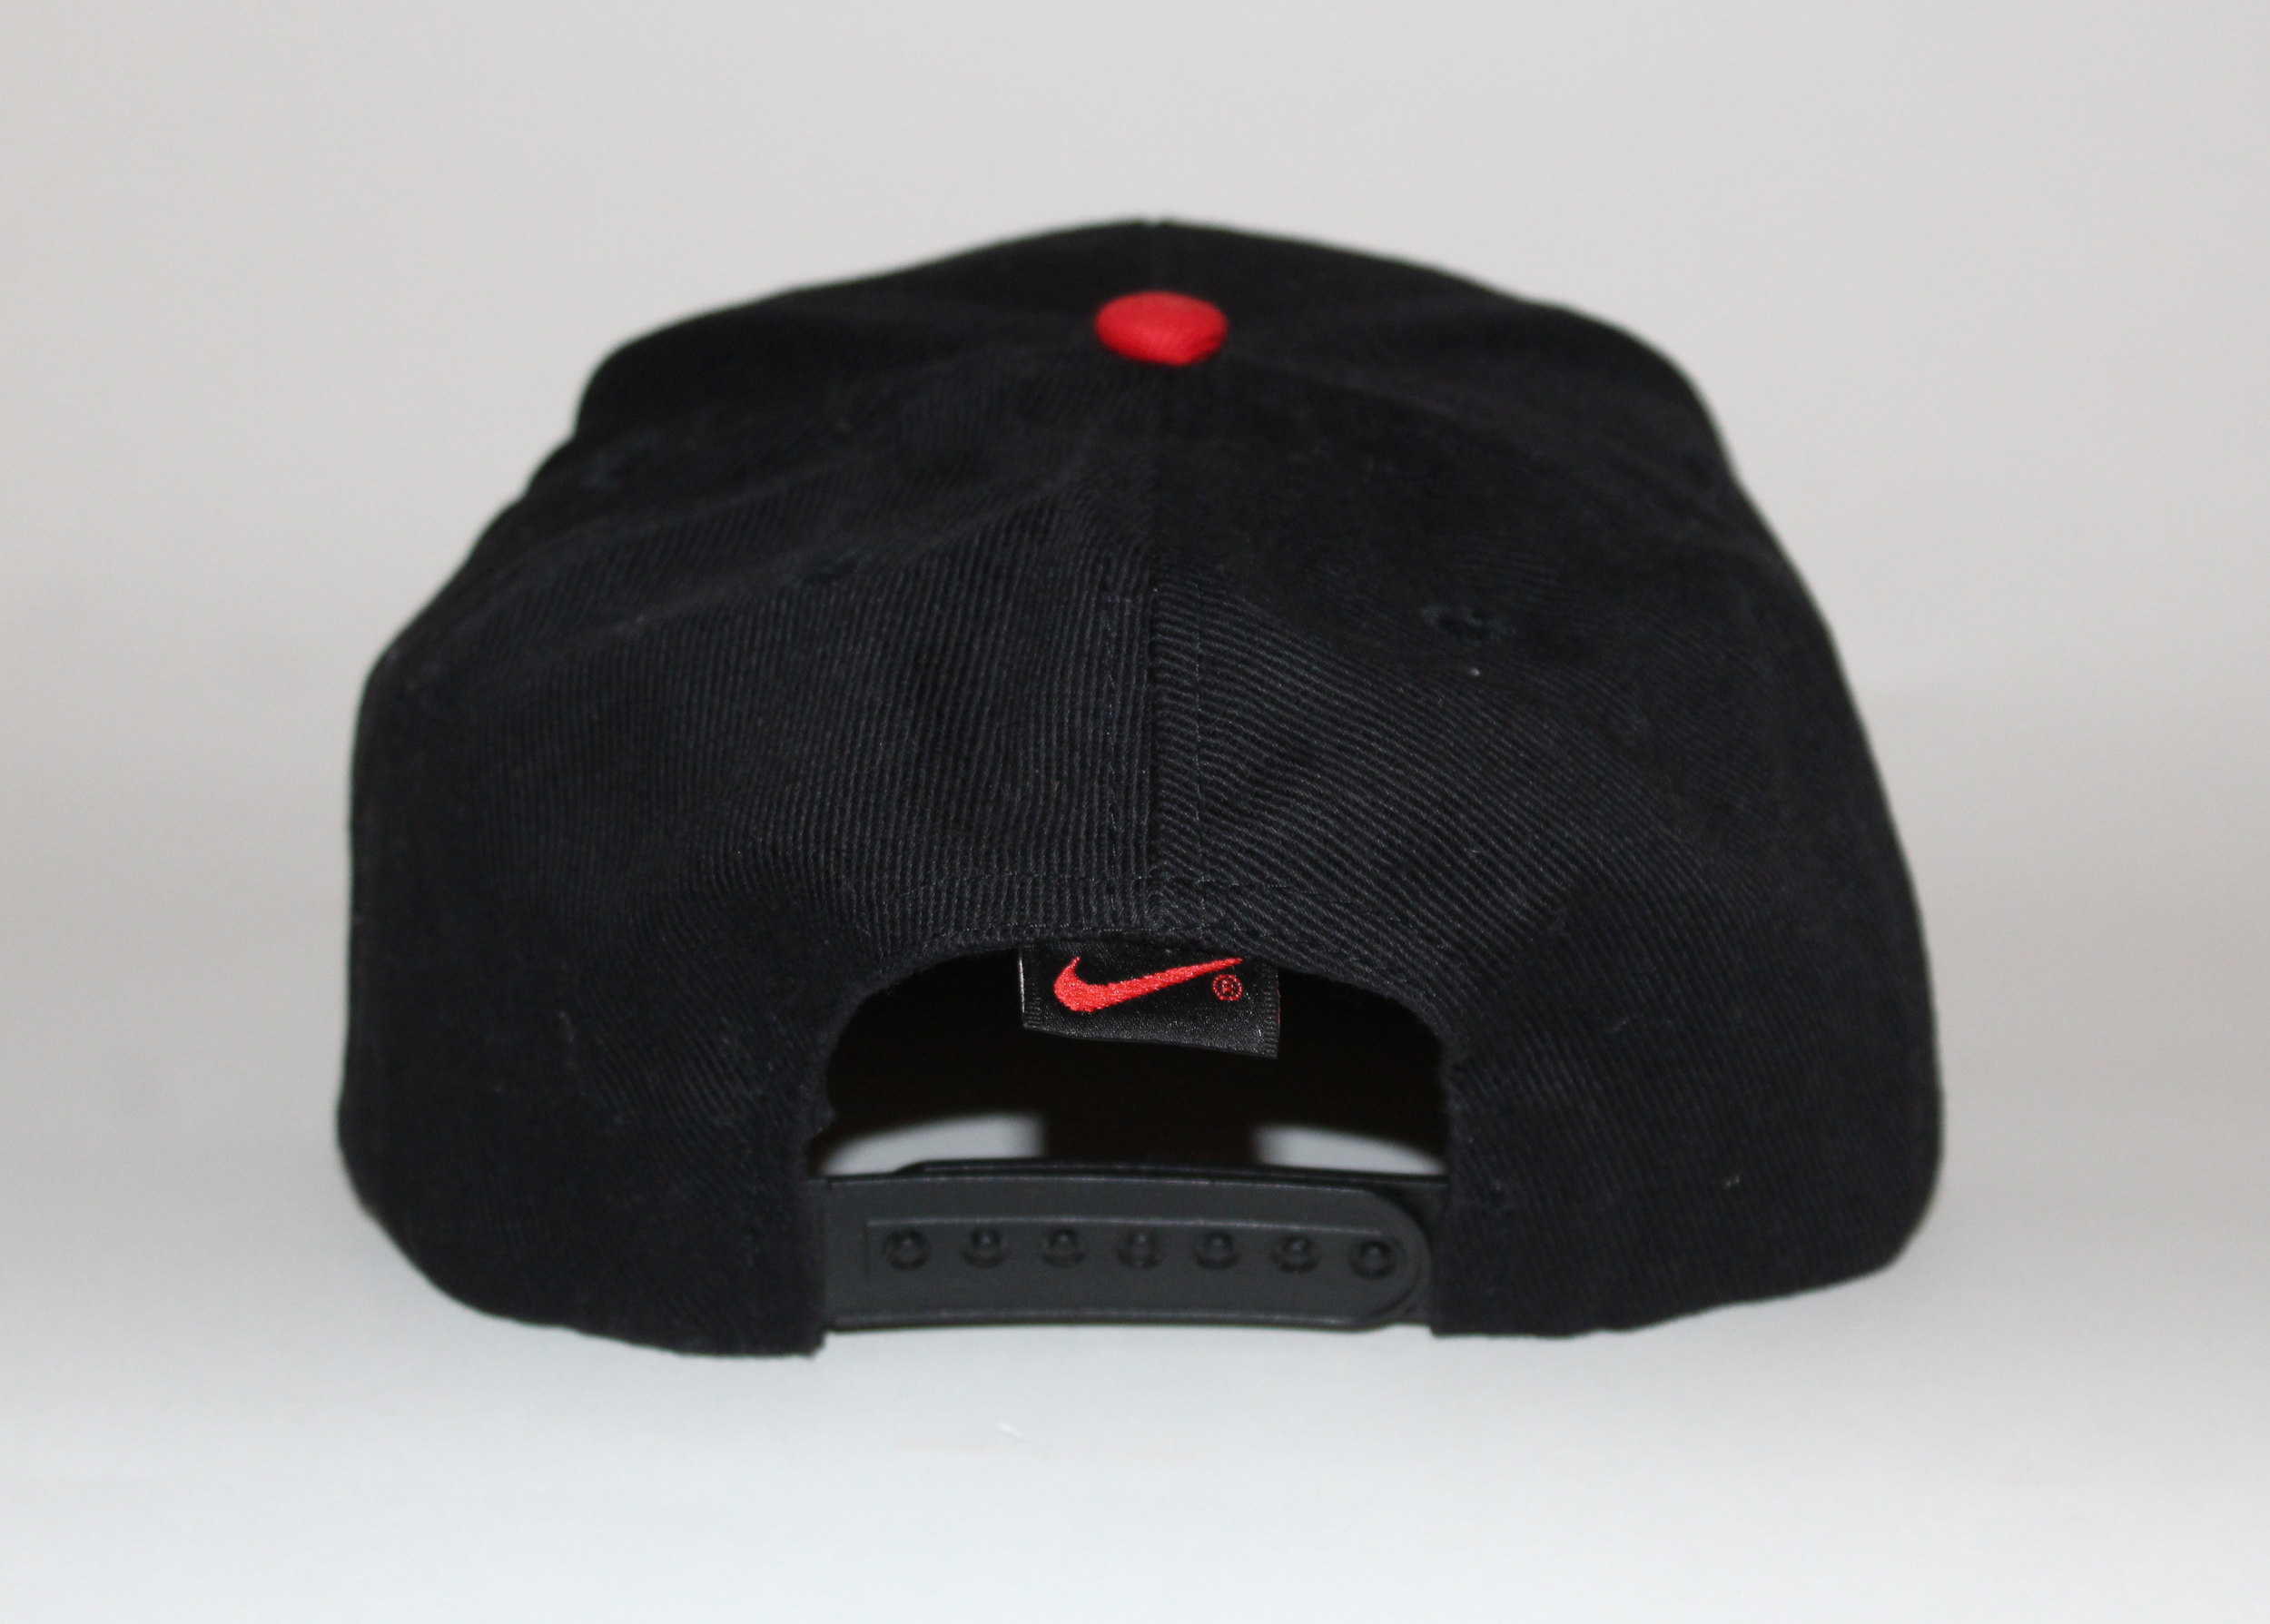 black nike hat with red swoosh